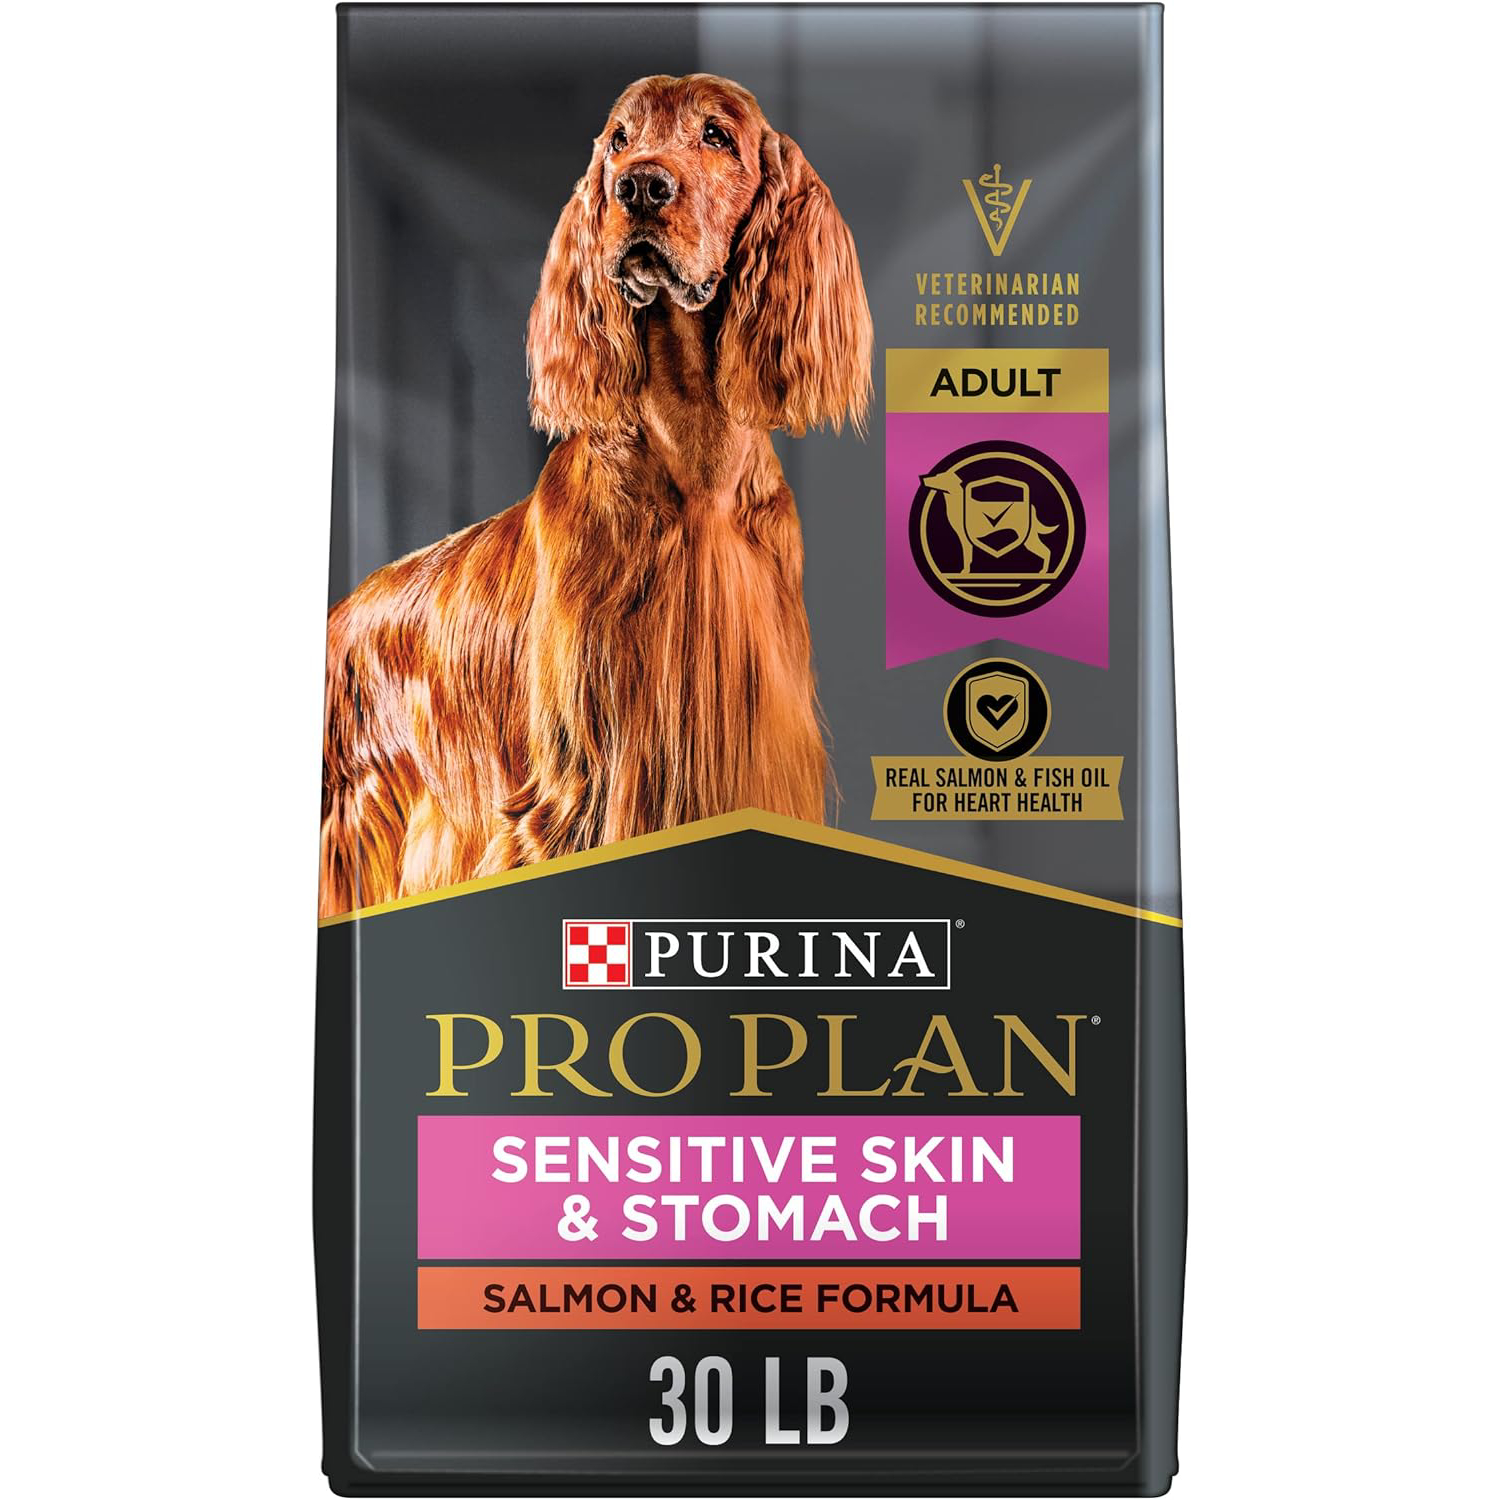 New Project Purina Pro Plan Sensitive Skin and Stomach Dog Food Salmon and Rice Formula 